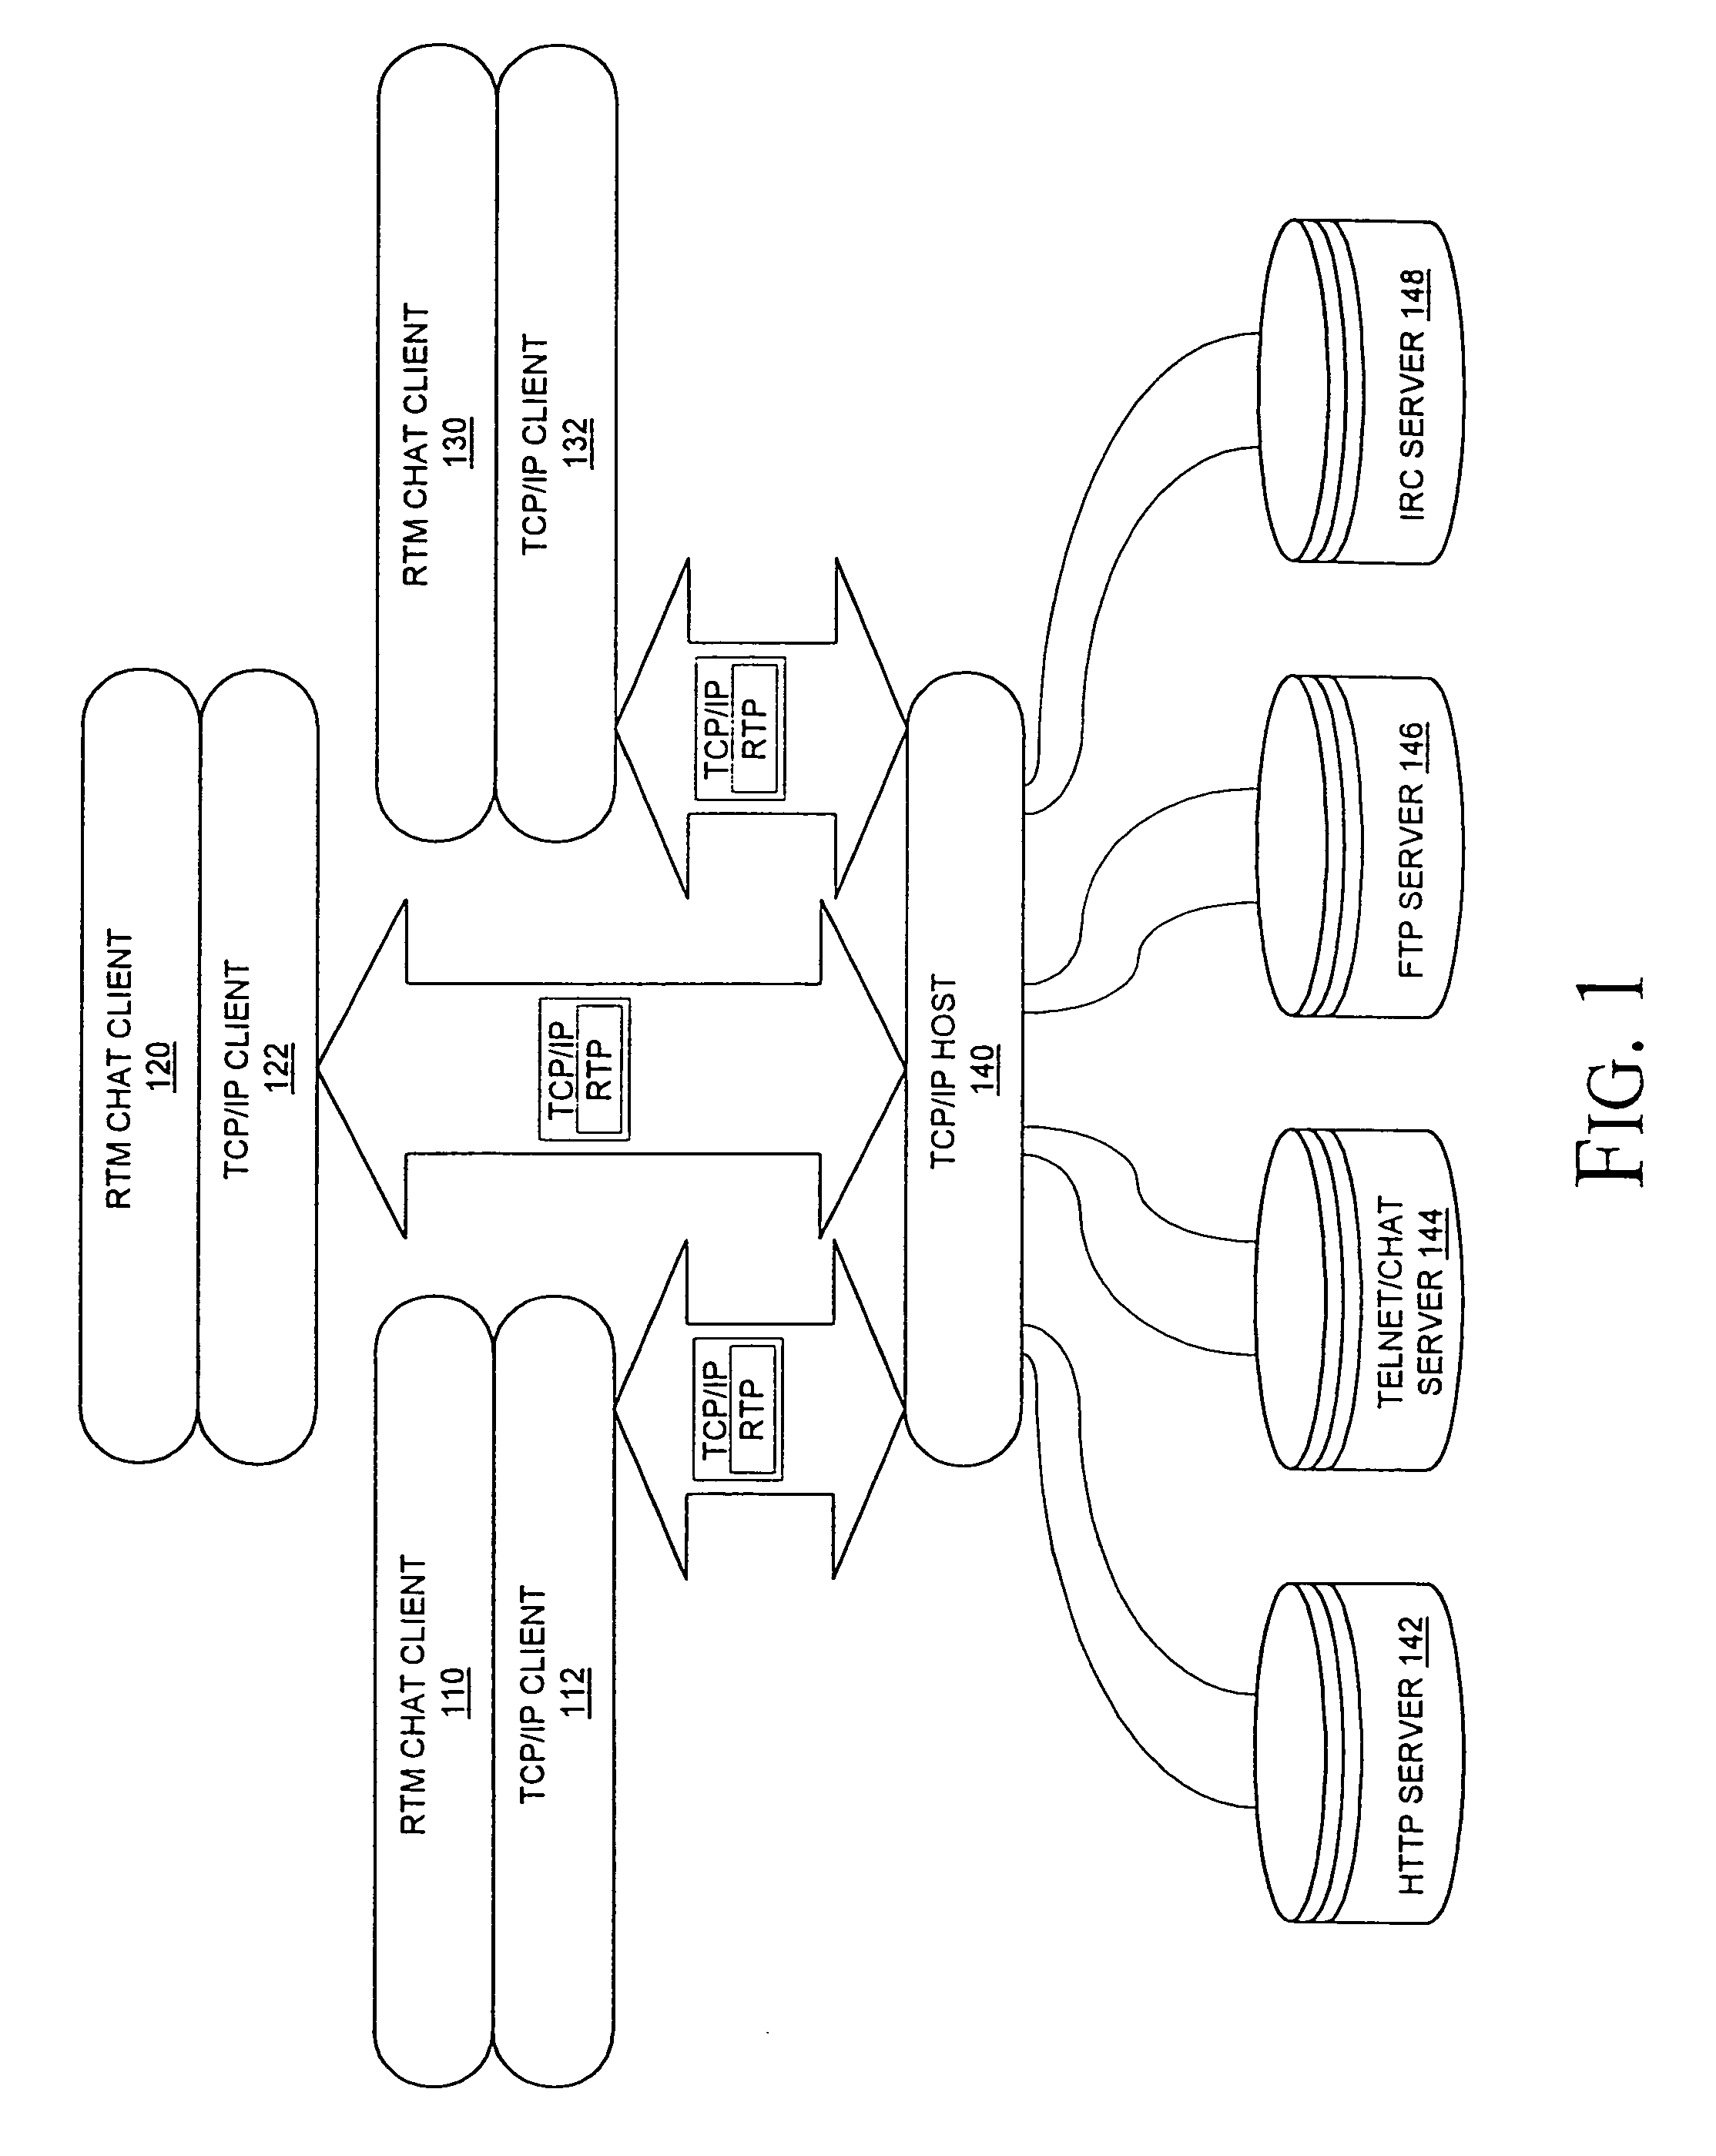 Method and apparatus for embedding chat functions in a web page